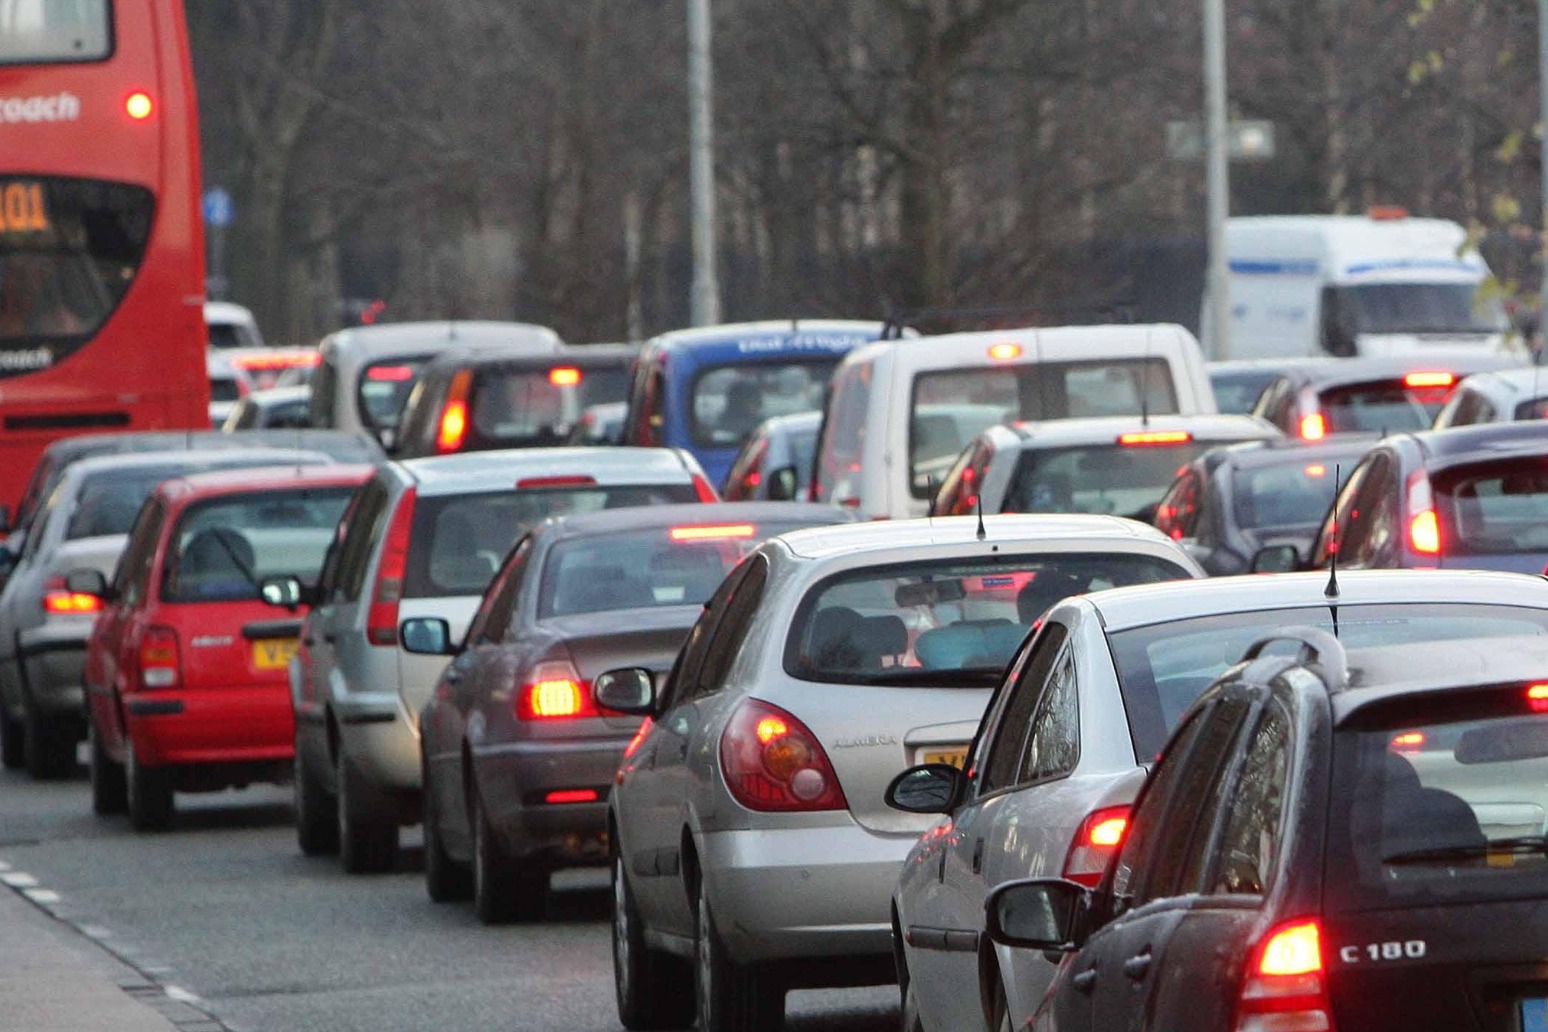 London remains world’s most congested city 